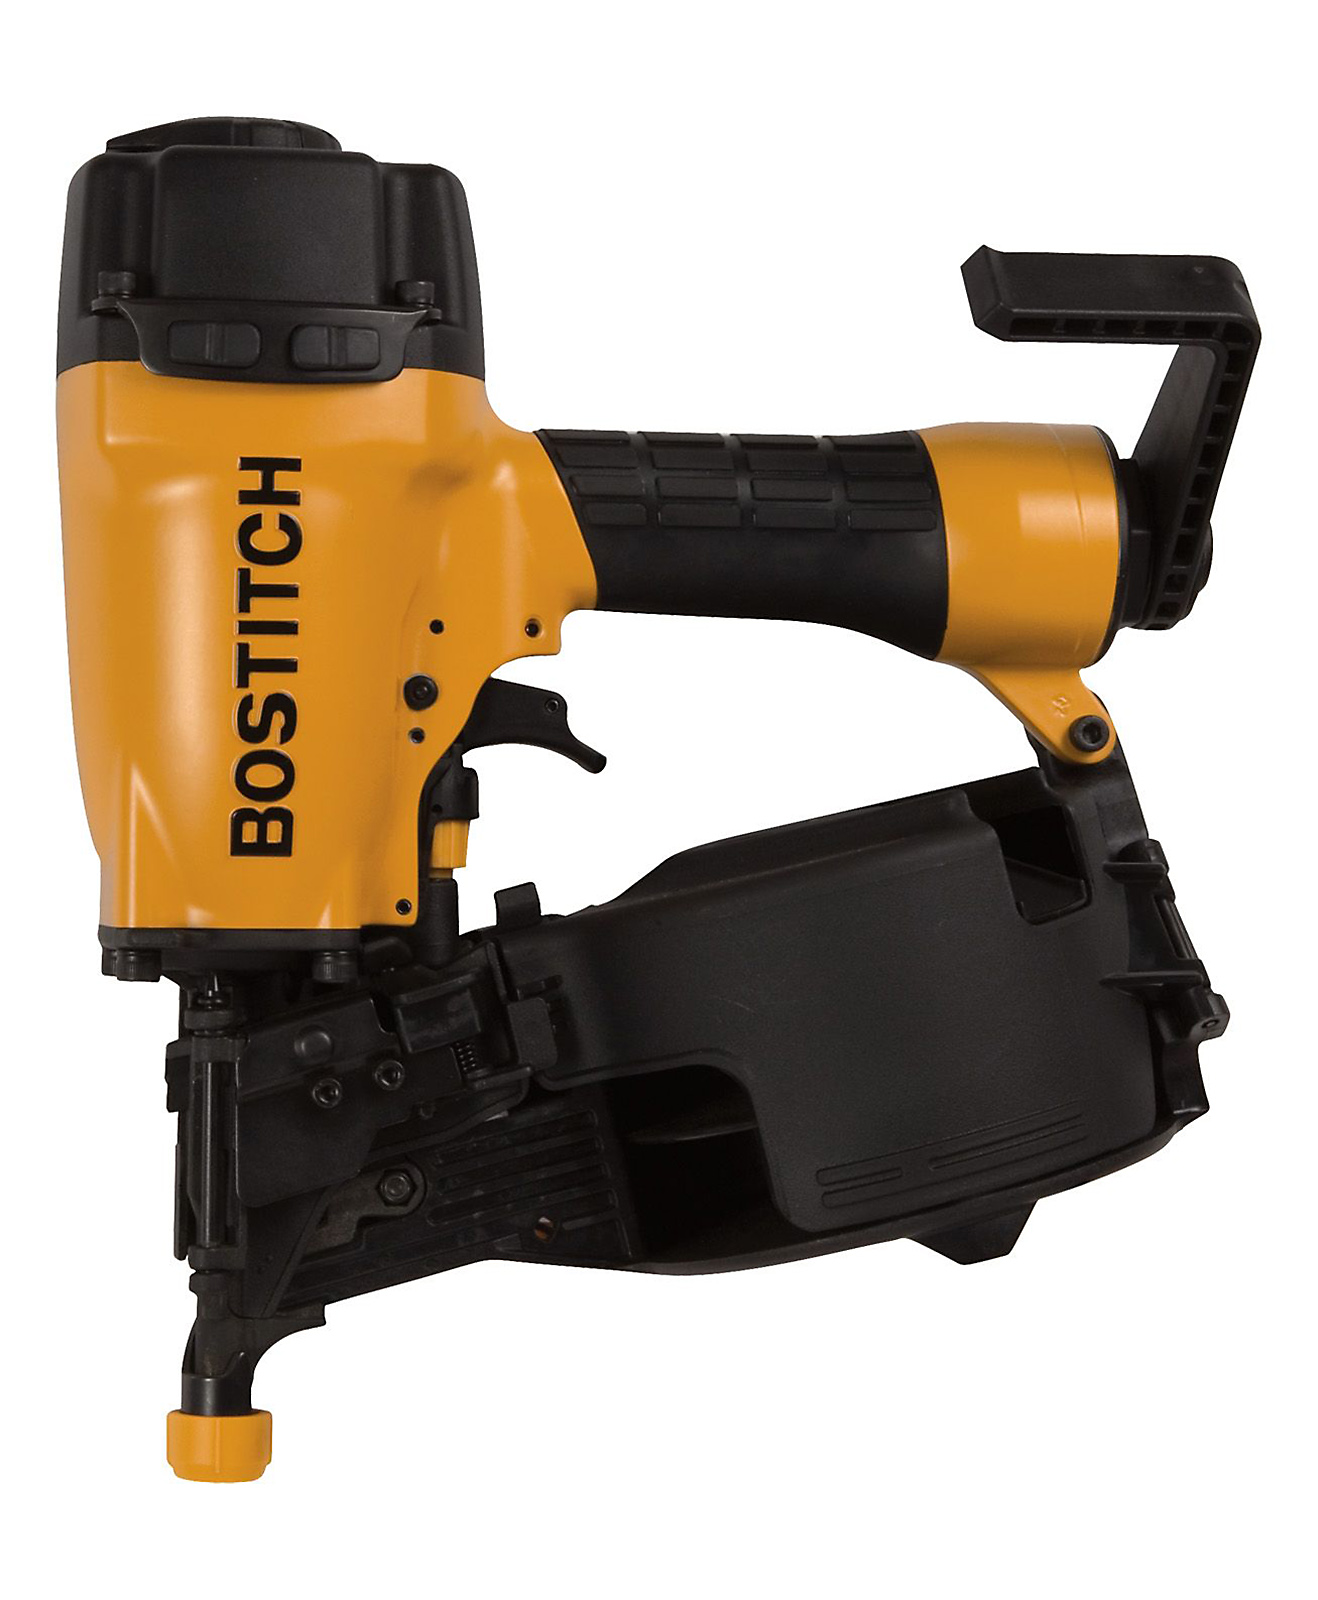 Stanley Bostitch BOSTITCH N66C-1 1-1/4-inch to 2-1/2-inch Coil Siding Nailer with Aluminum Housing